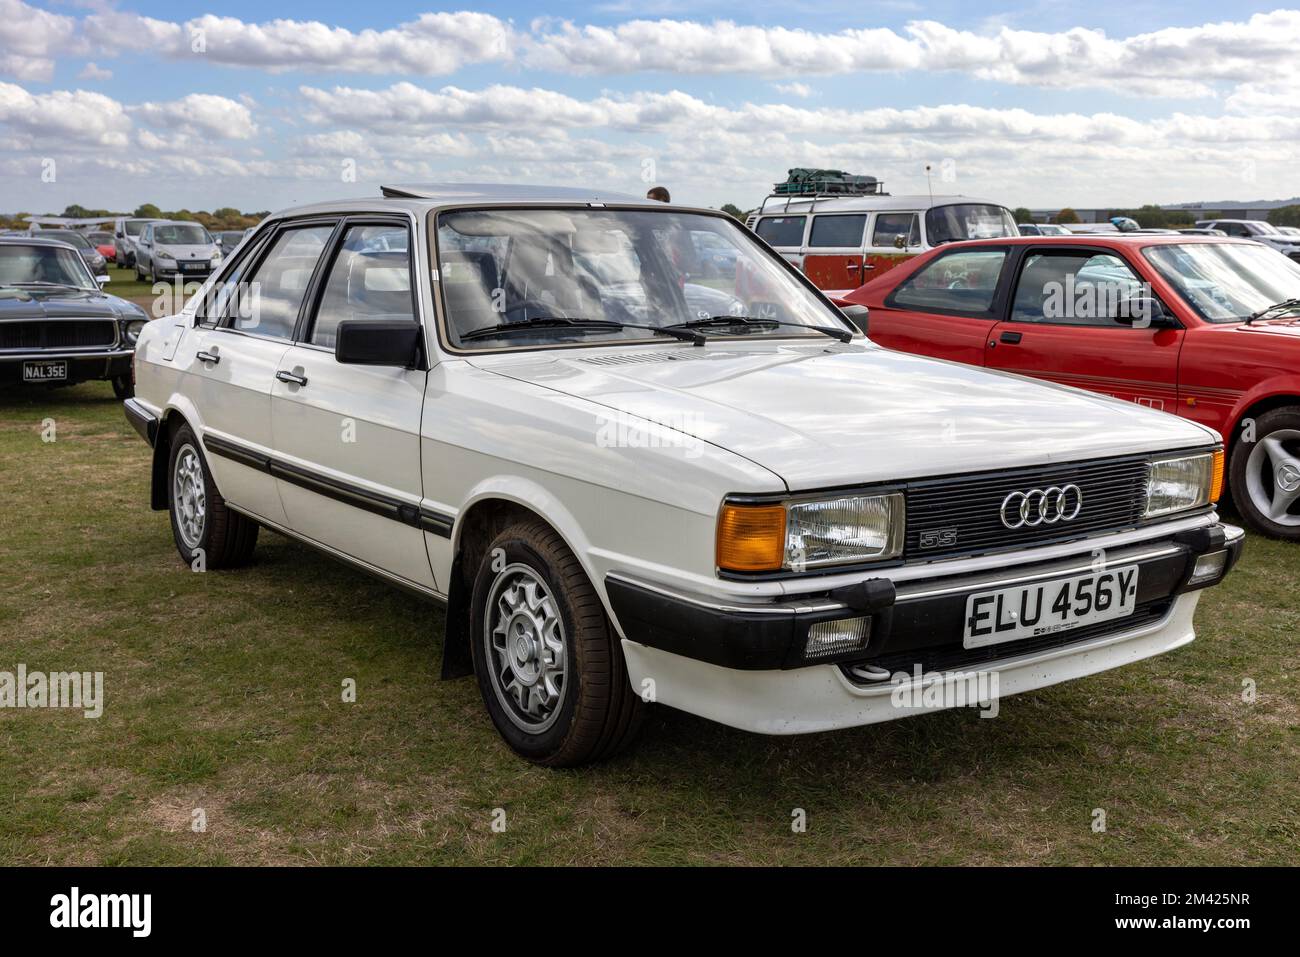 1983 Audi 80 ‘ELU456Y’ on display at the October Scramble held at the Bicester Heritage Centre on the 9th October 2022. Stock Photo